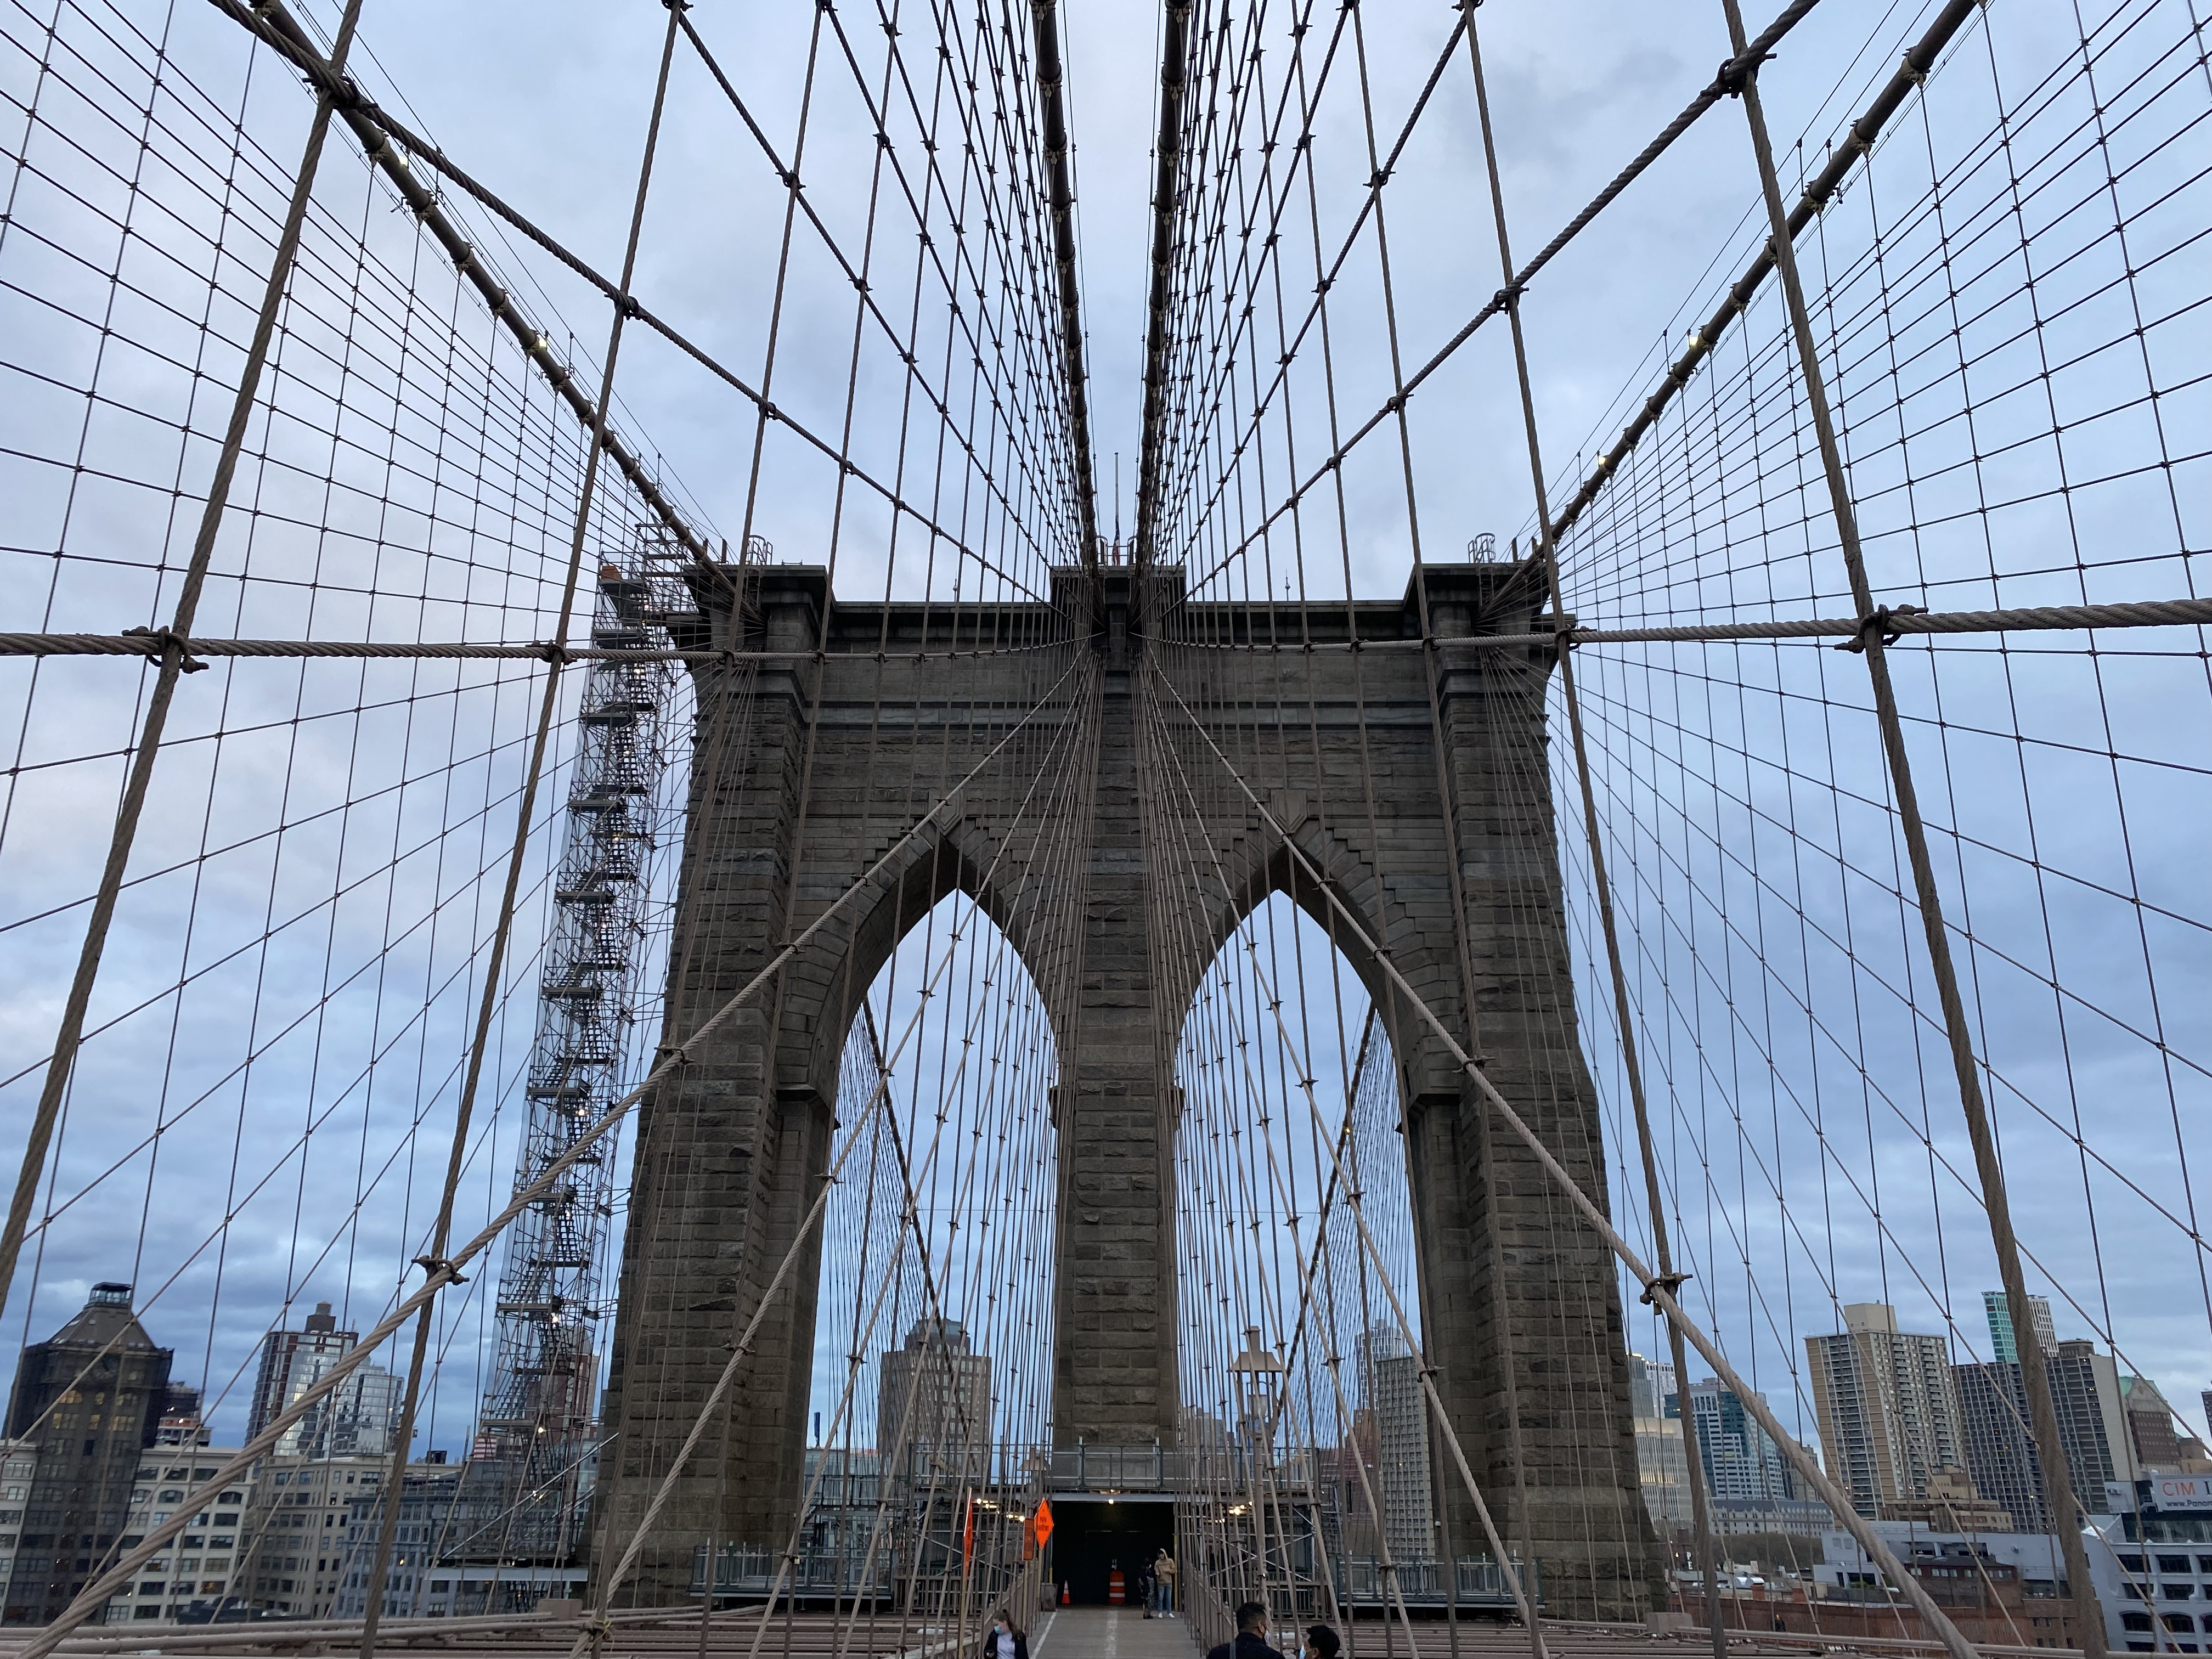 A view from the center of the Brooklyn Bridge.